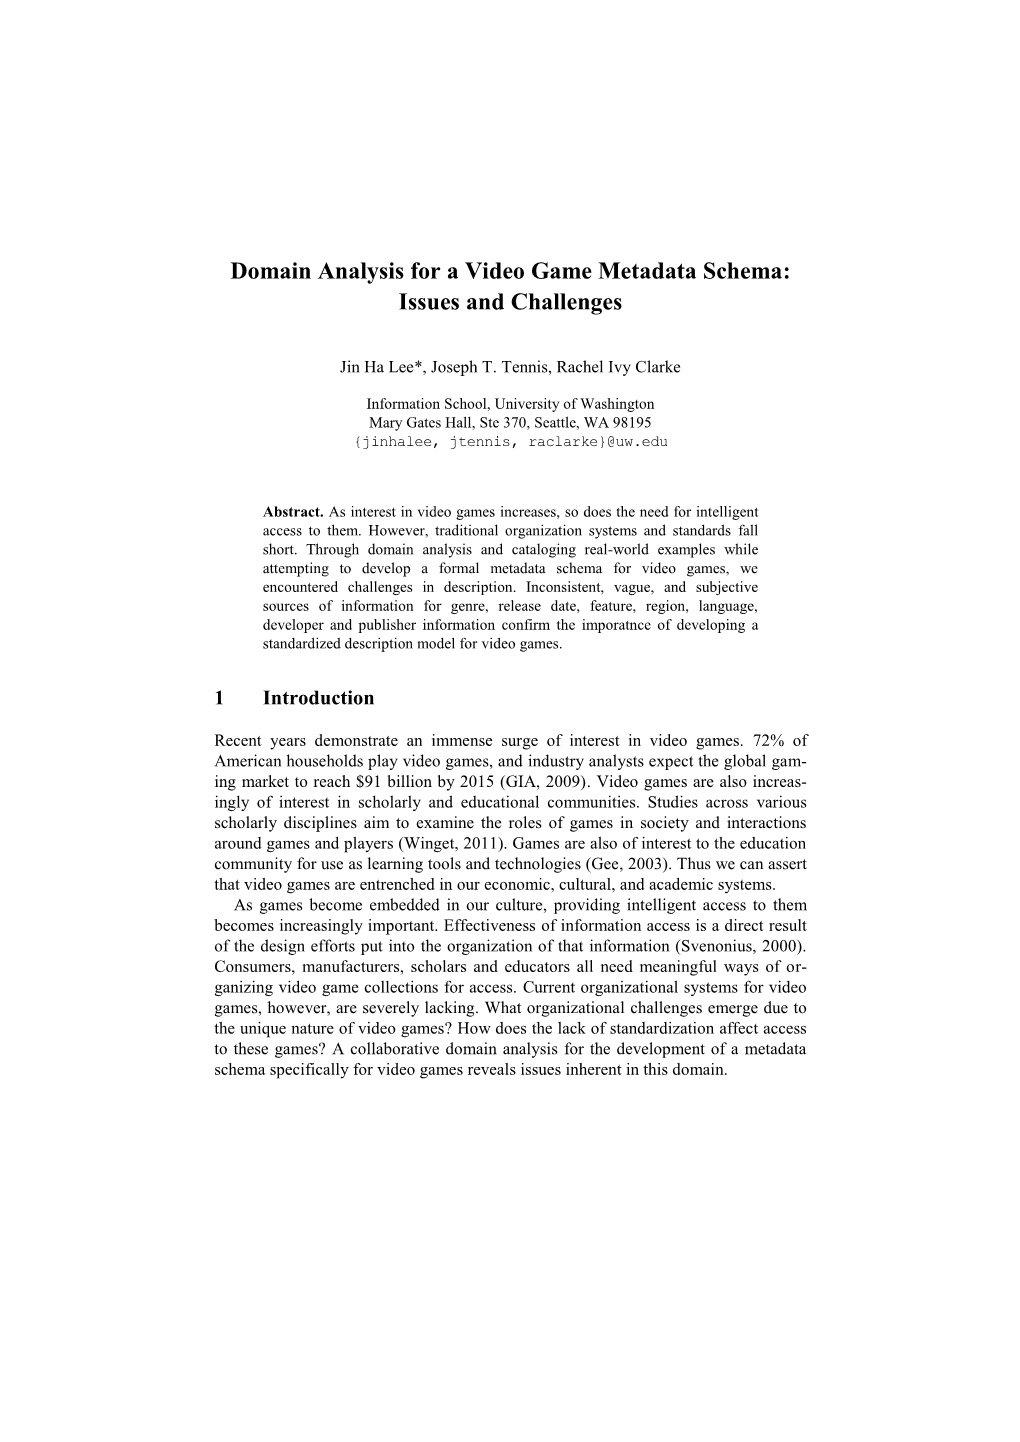 Domain Analysis for a Video Game Metadata Schema: Issues and Challenges